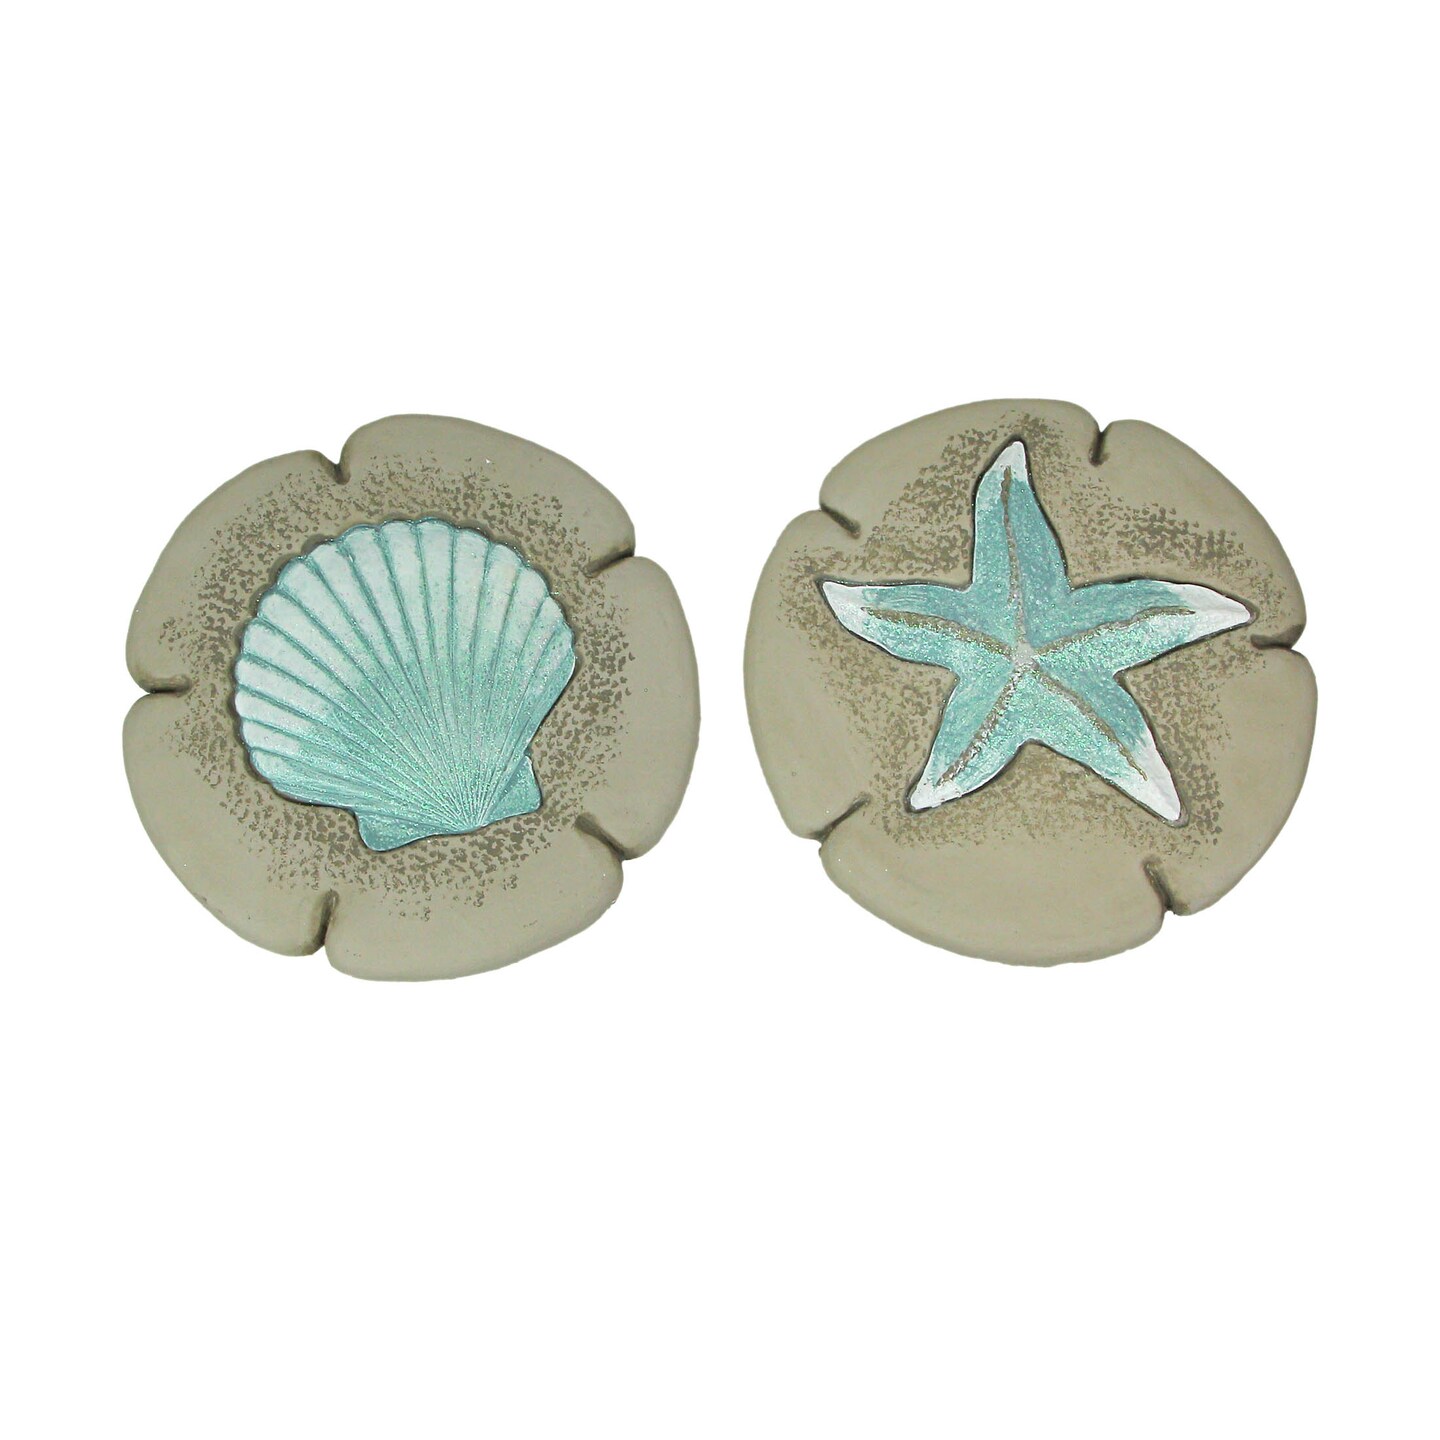 Sand and Sky Starfish and Shell Decorative Stone Sculpture Wall Hangings Set